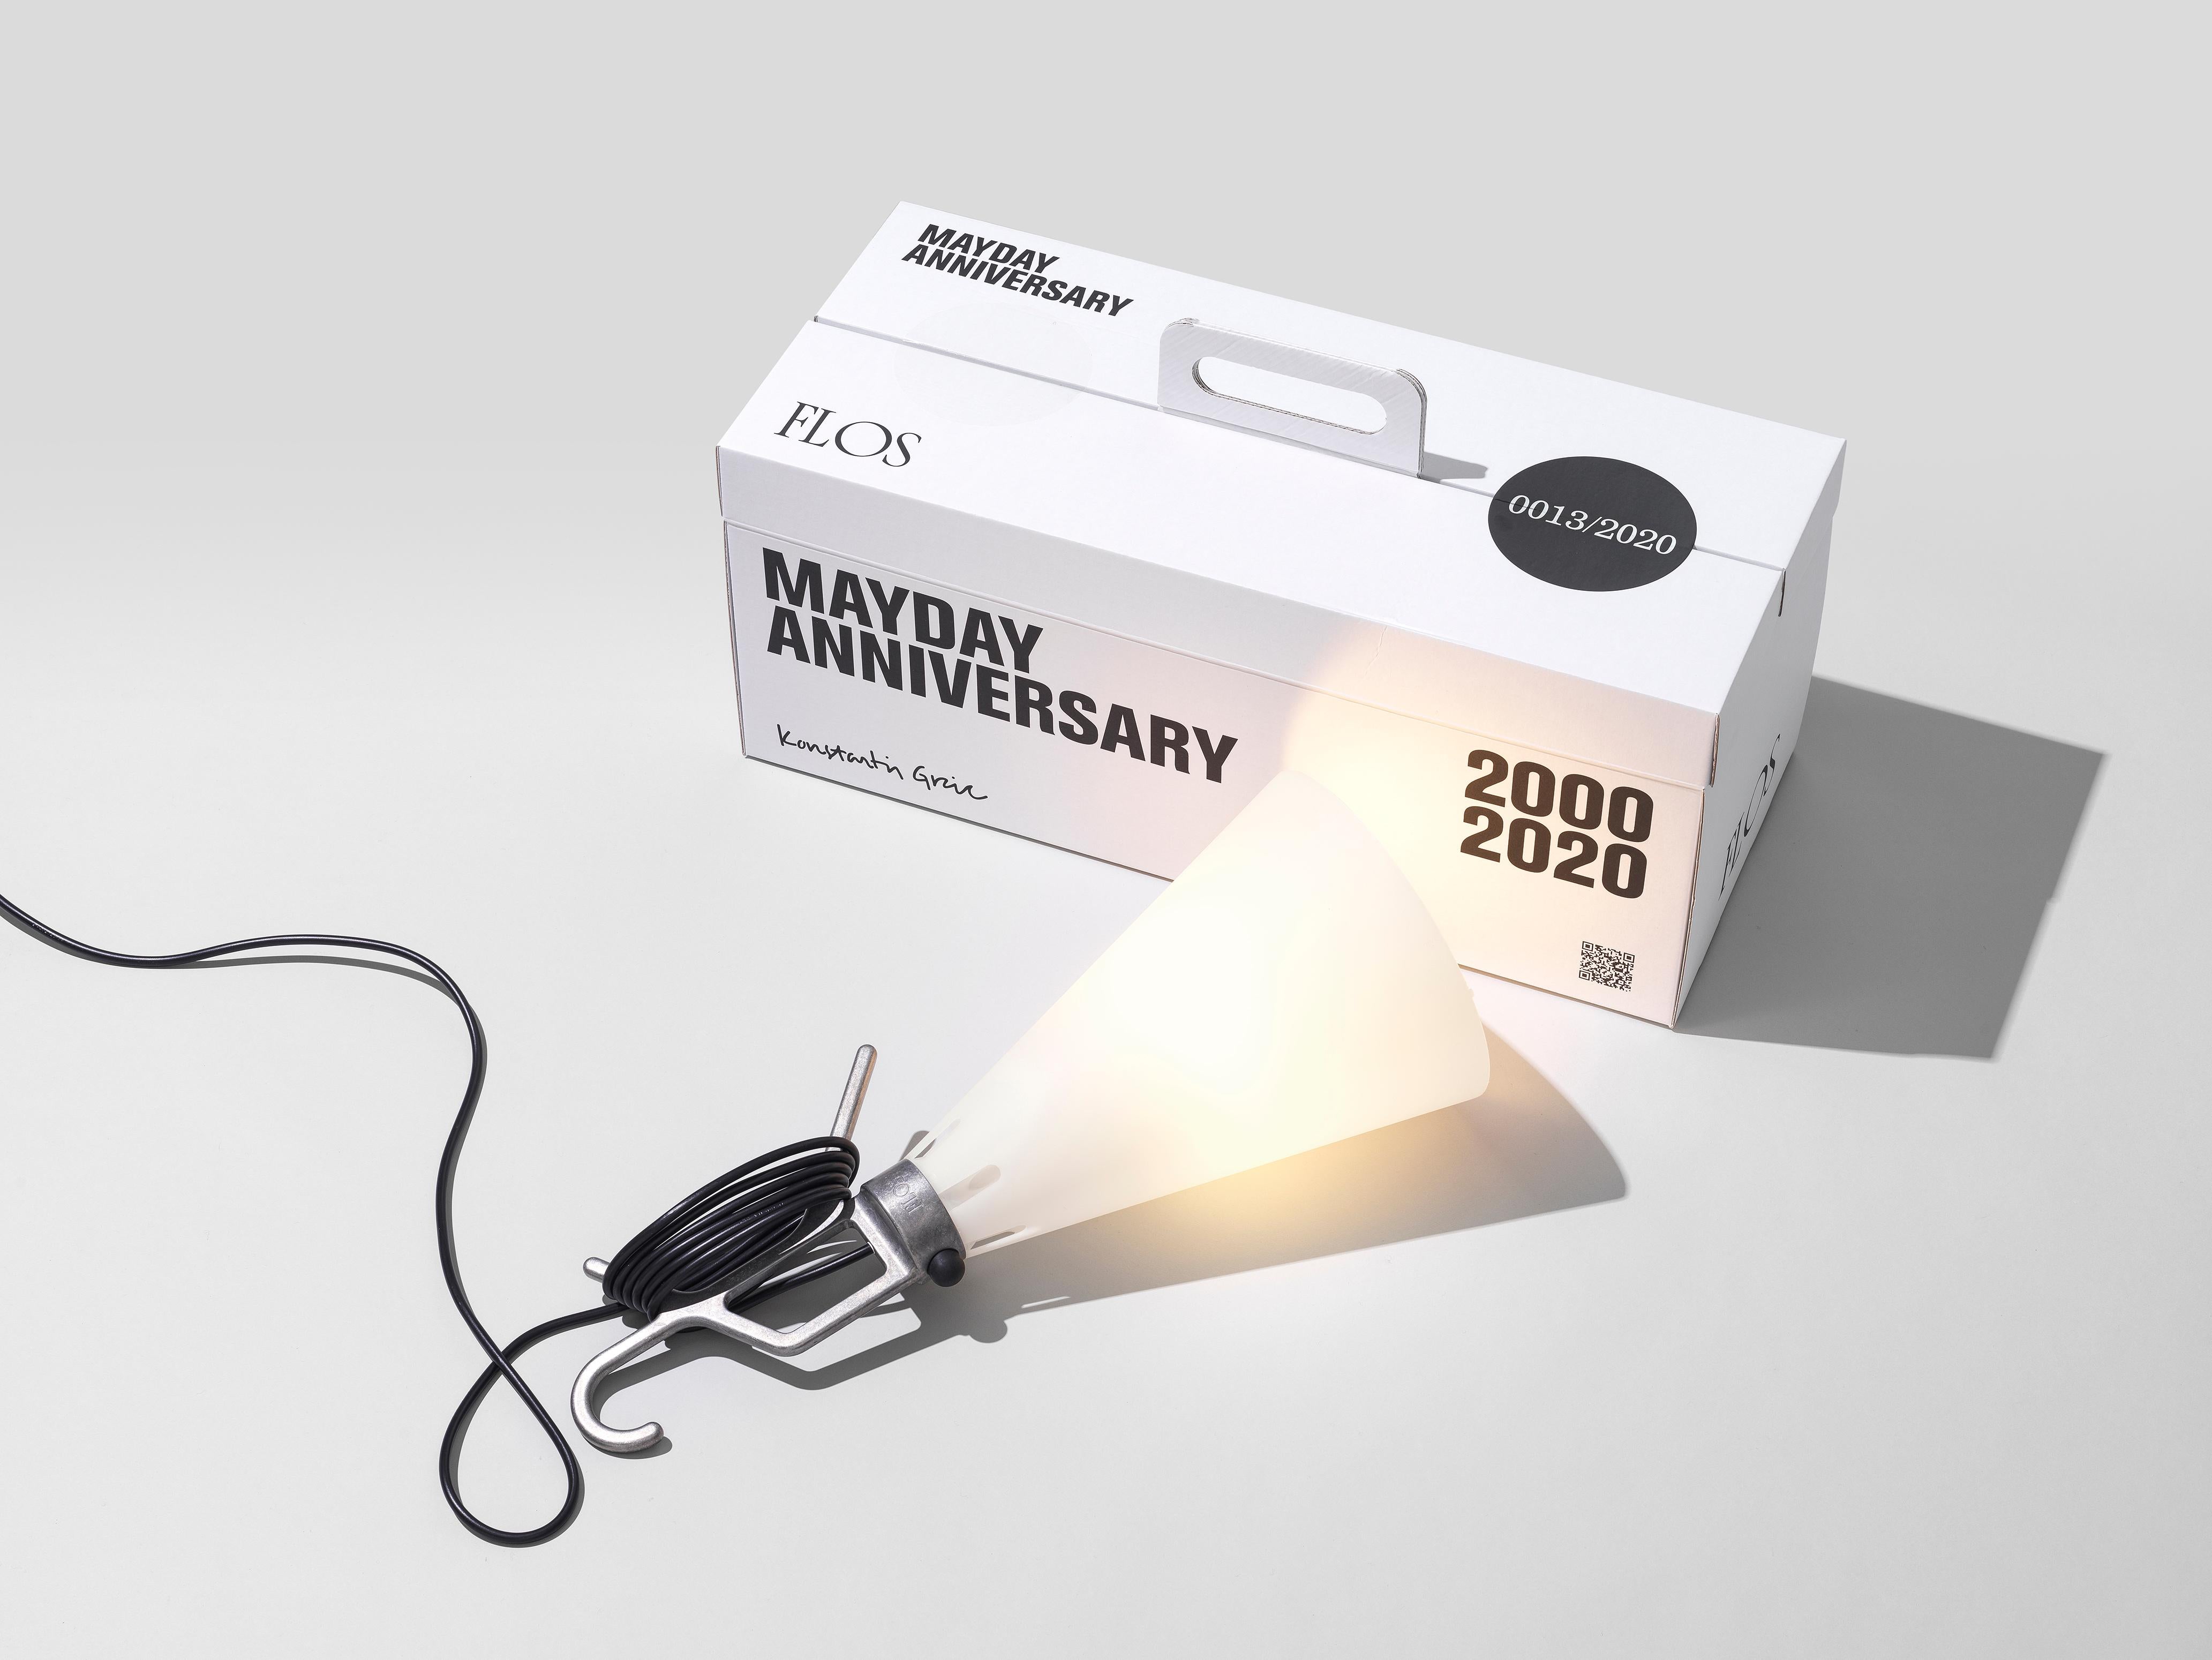 Flos Mayday Anniversary Multi Use Lamp in Light Grey by Konstantin Grcic 2